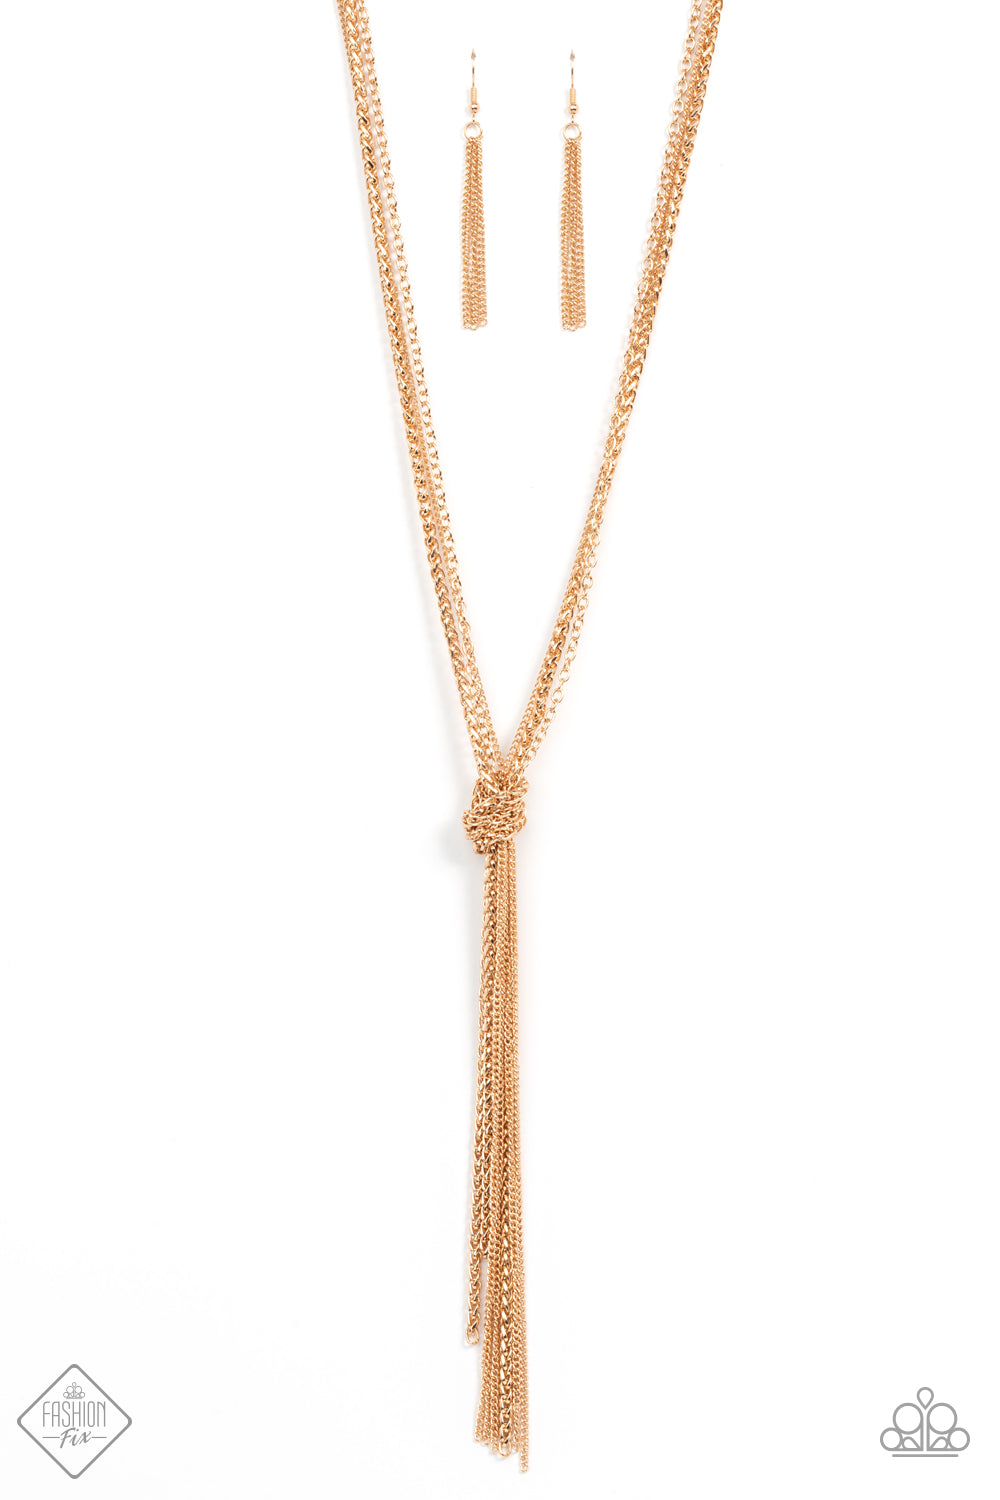 KNOT All There Gold Necklace - Paparazzi Accessories  Strands of long glistening gold chains in round, delicate, and classic styles are pulled together in a sassy knot creating a show-stopping fringe tassel and a flirty finish. Features an adjustable clasp closure.  All Paparazzi Accessories are lead free and nickel free!  Sold as one individual necklace. Includes one pair of matching earrings.